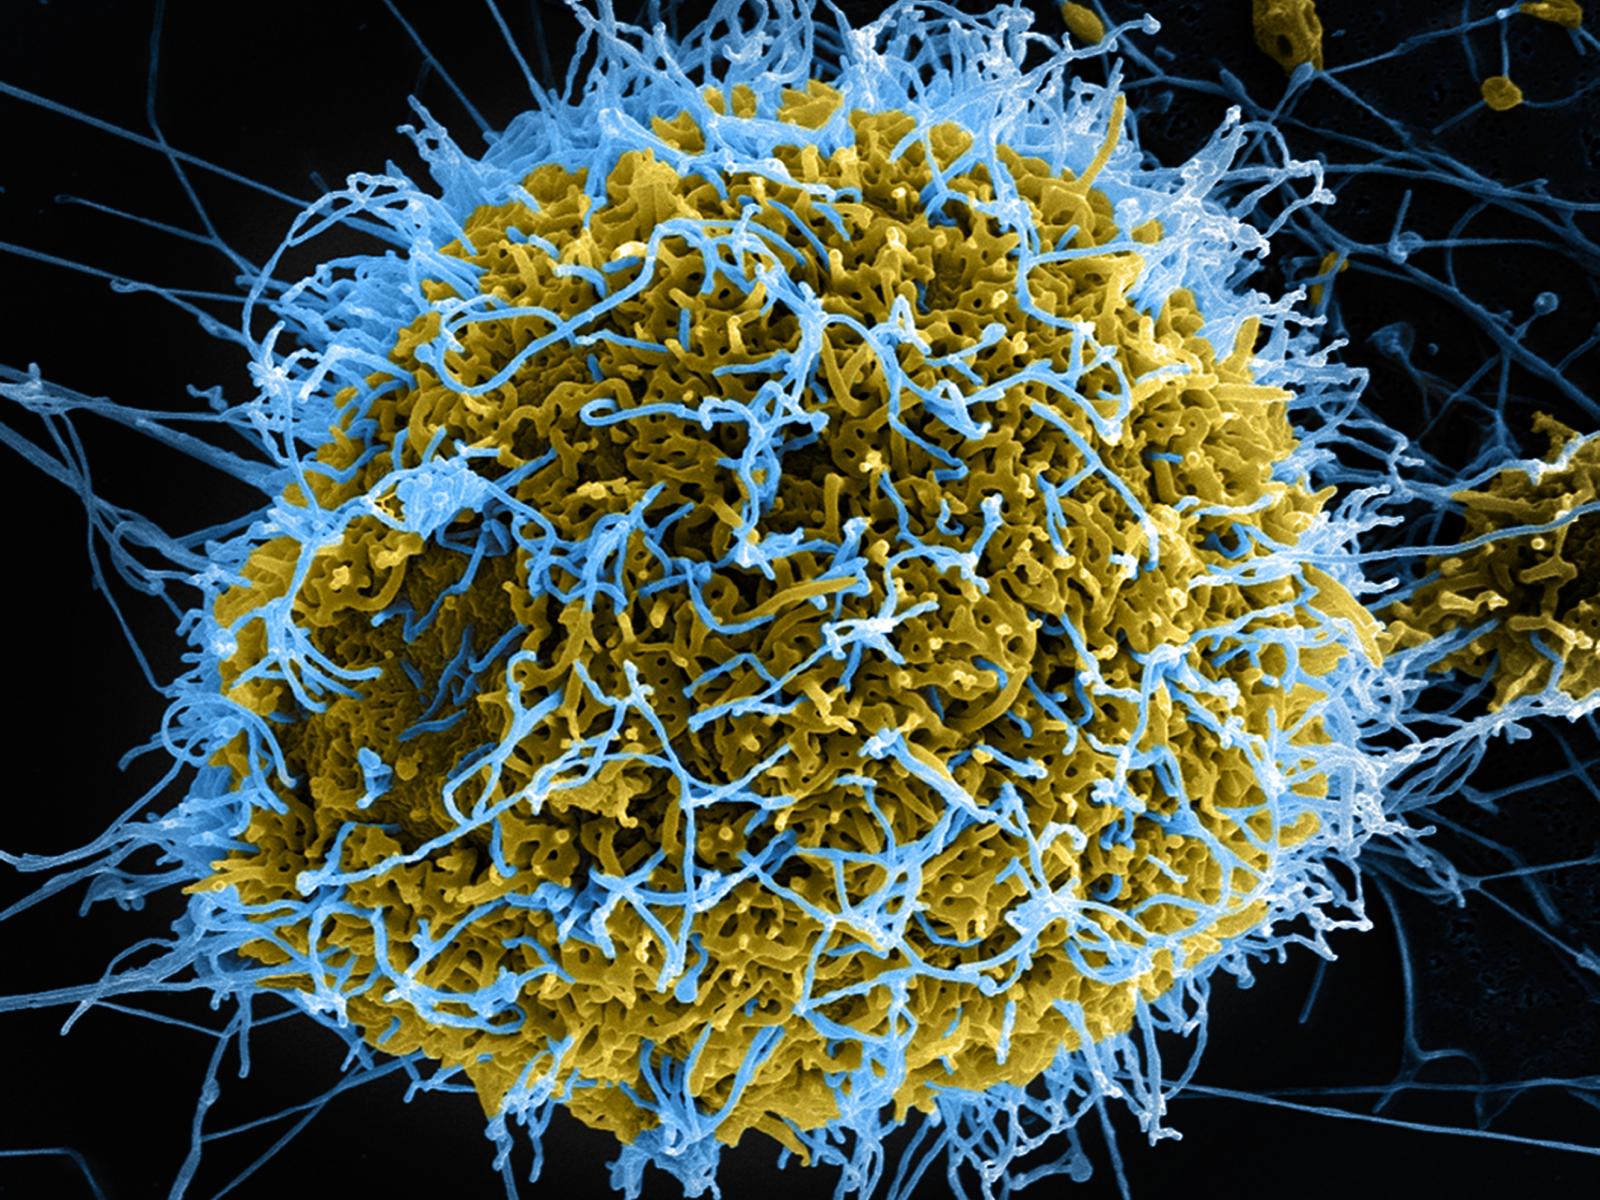 Colorized scanning electron micrograph of filamentous Ebola virus particles (blue) budding from a chronically infected VERO E6 cell (yellow-green).